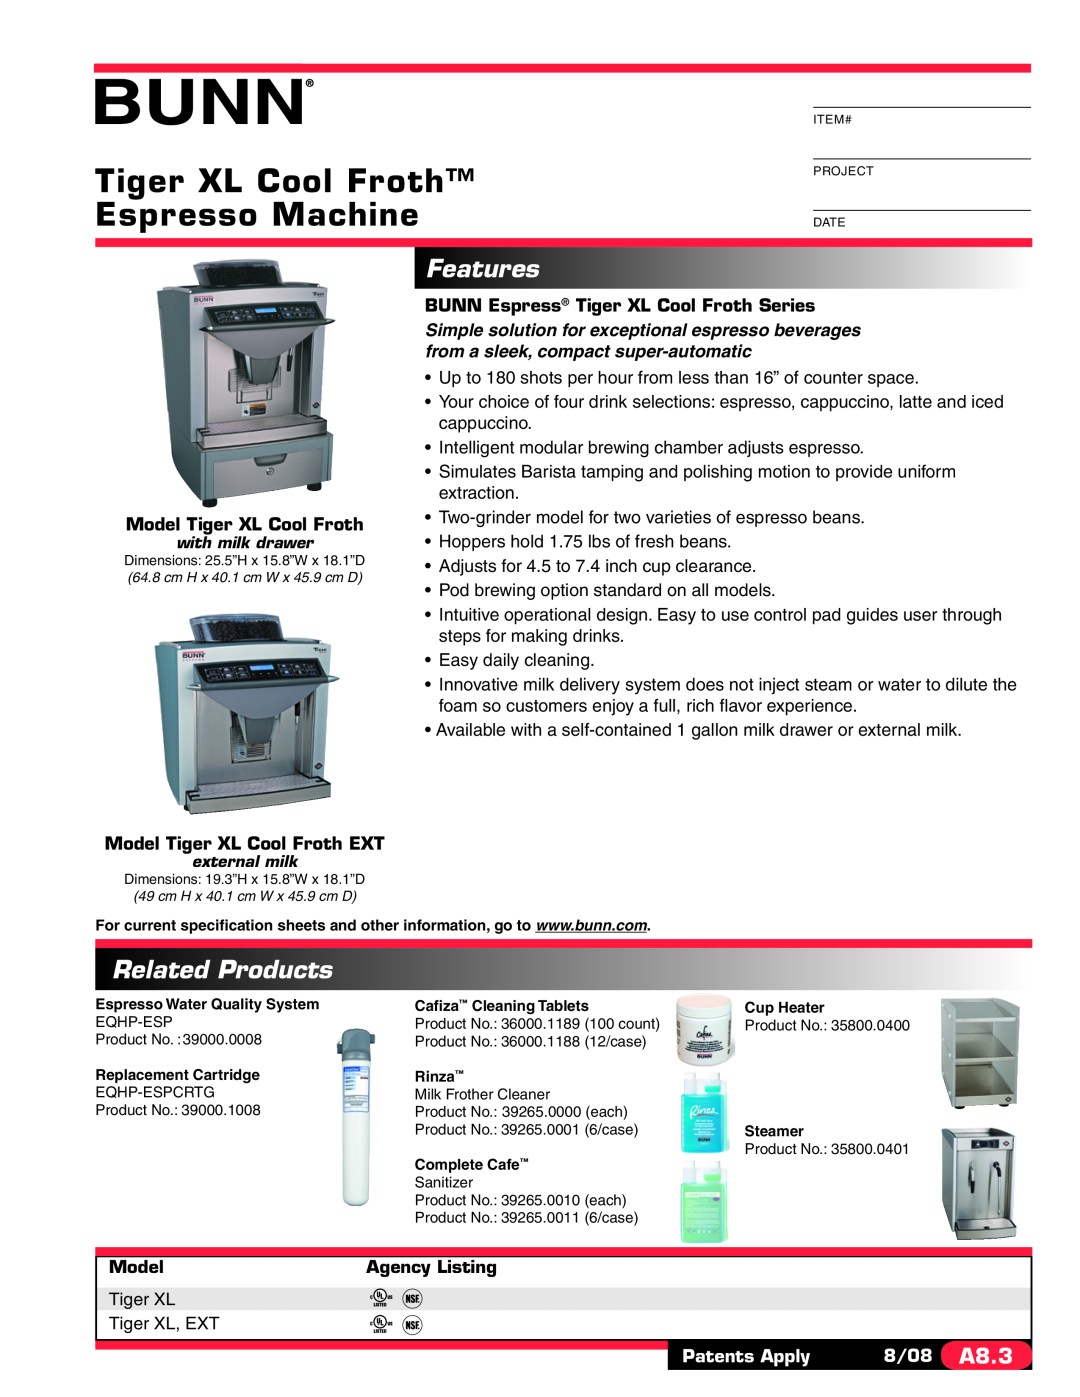 Bunn Froth Series specifications Tiger XL Cool Froth Espresso Machine, Features, Related Products, Patents Apply 